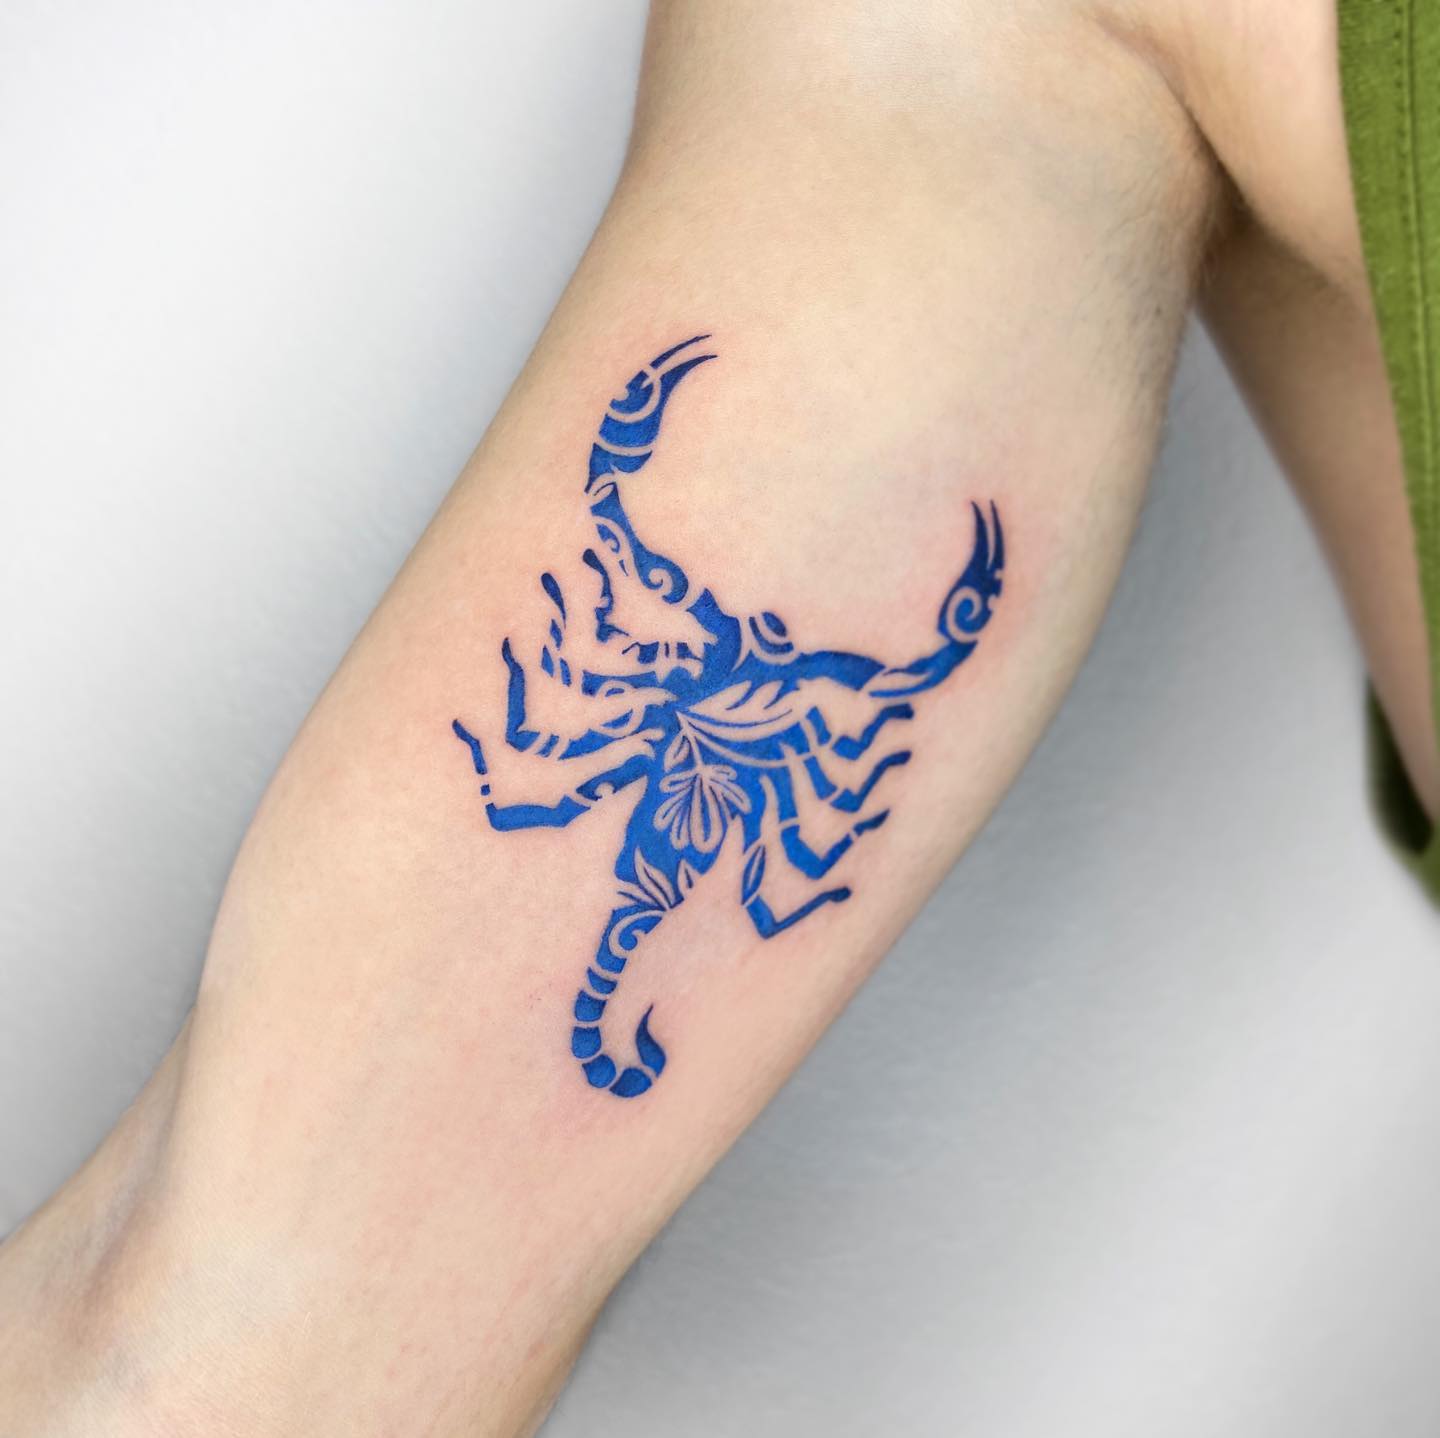 Tattoo tagged with: scorpion, lady, girl, woman, James McKenna |  inked-app.com